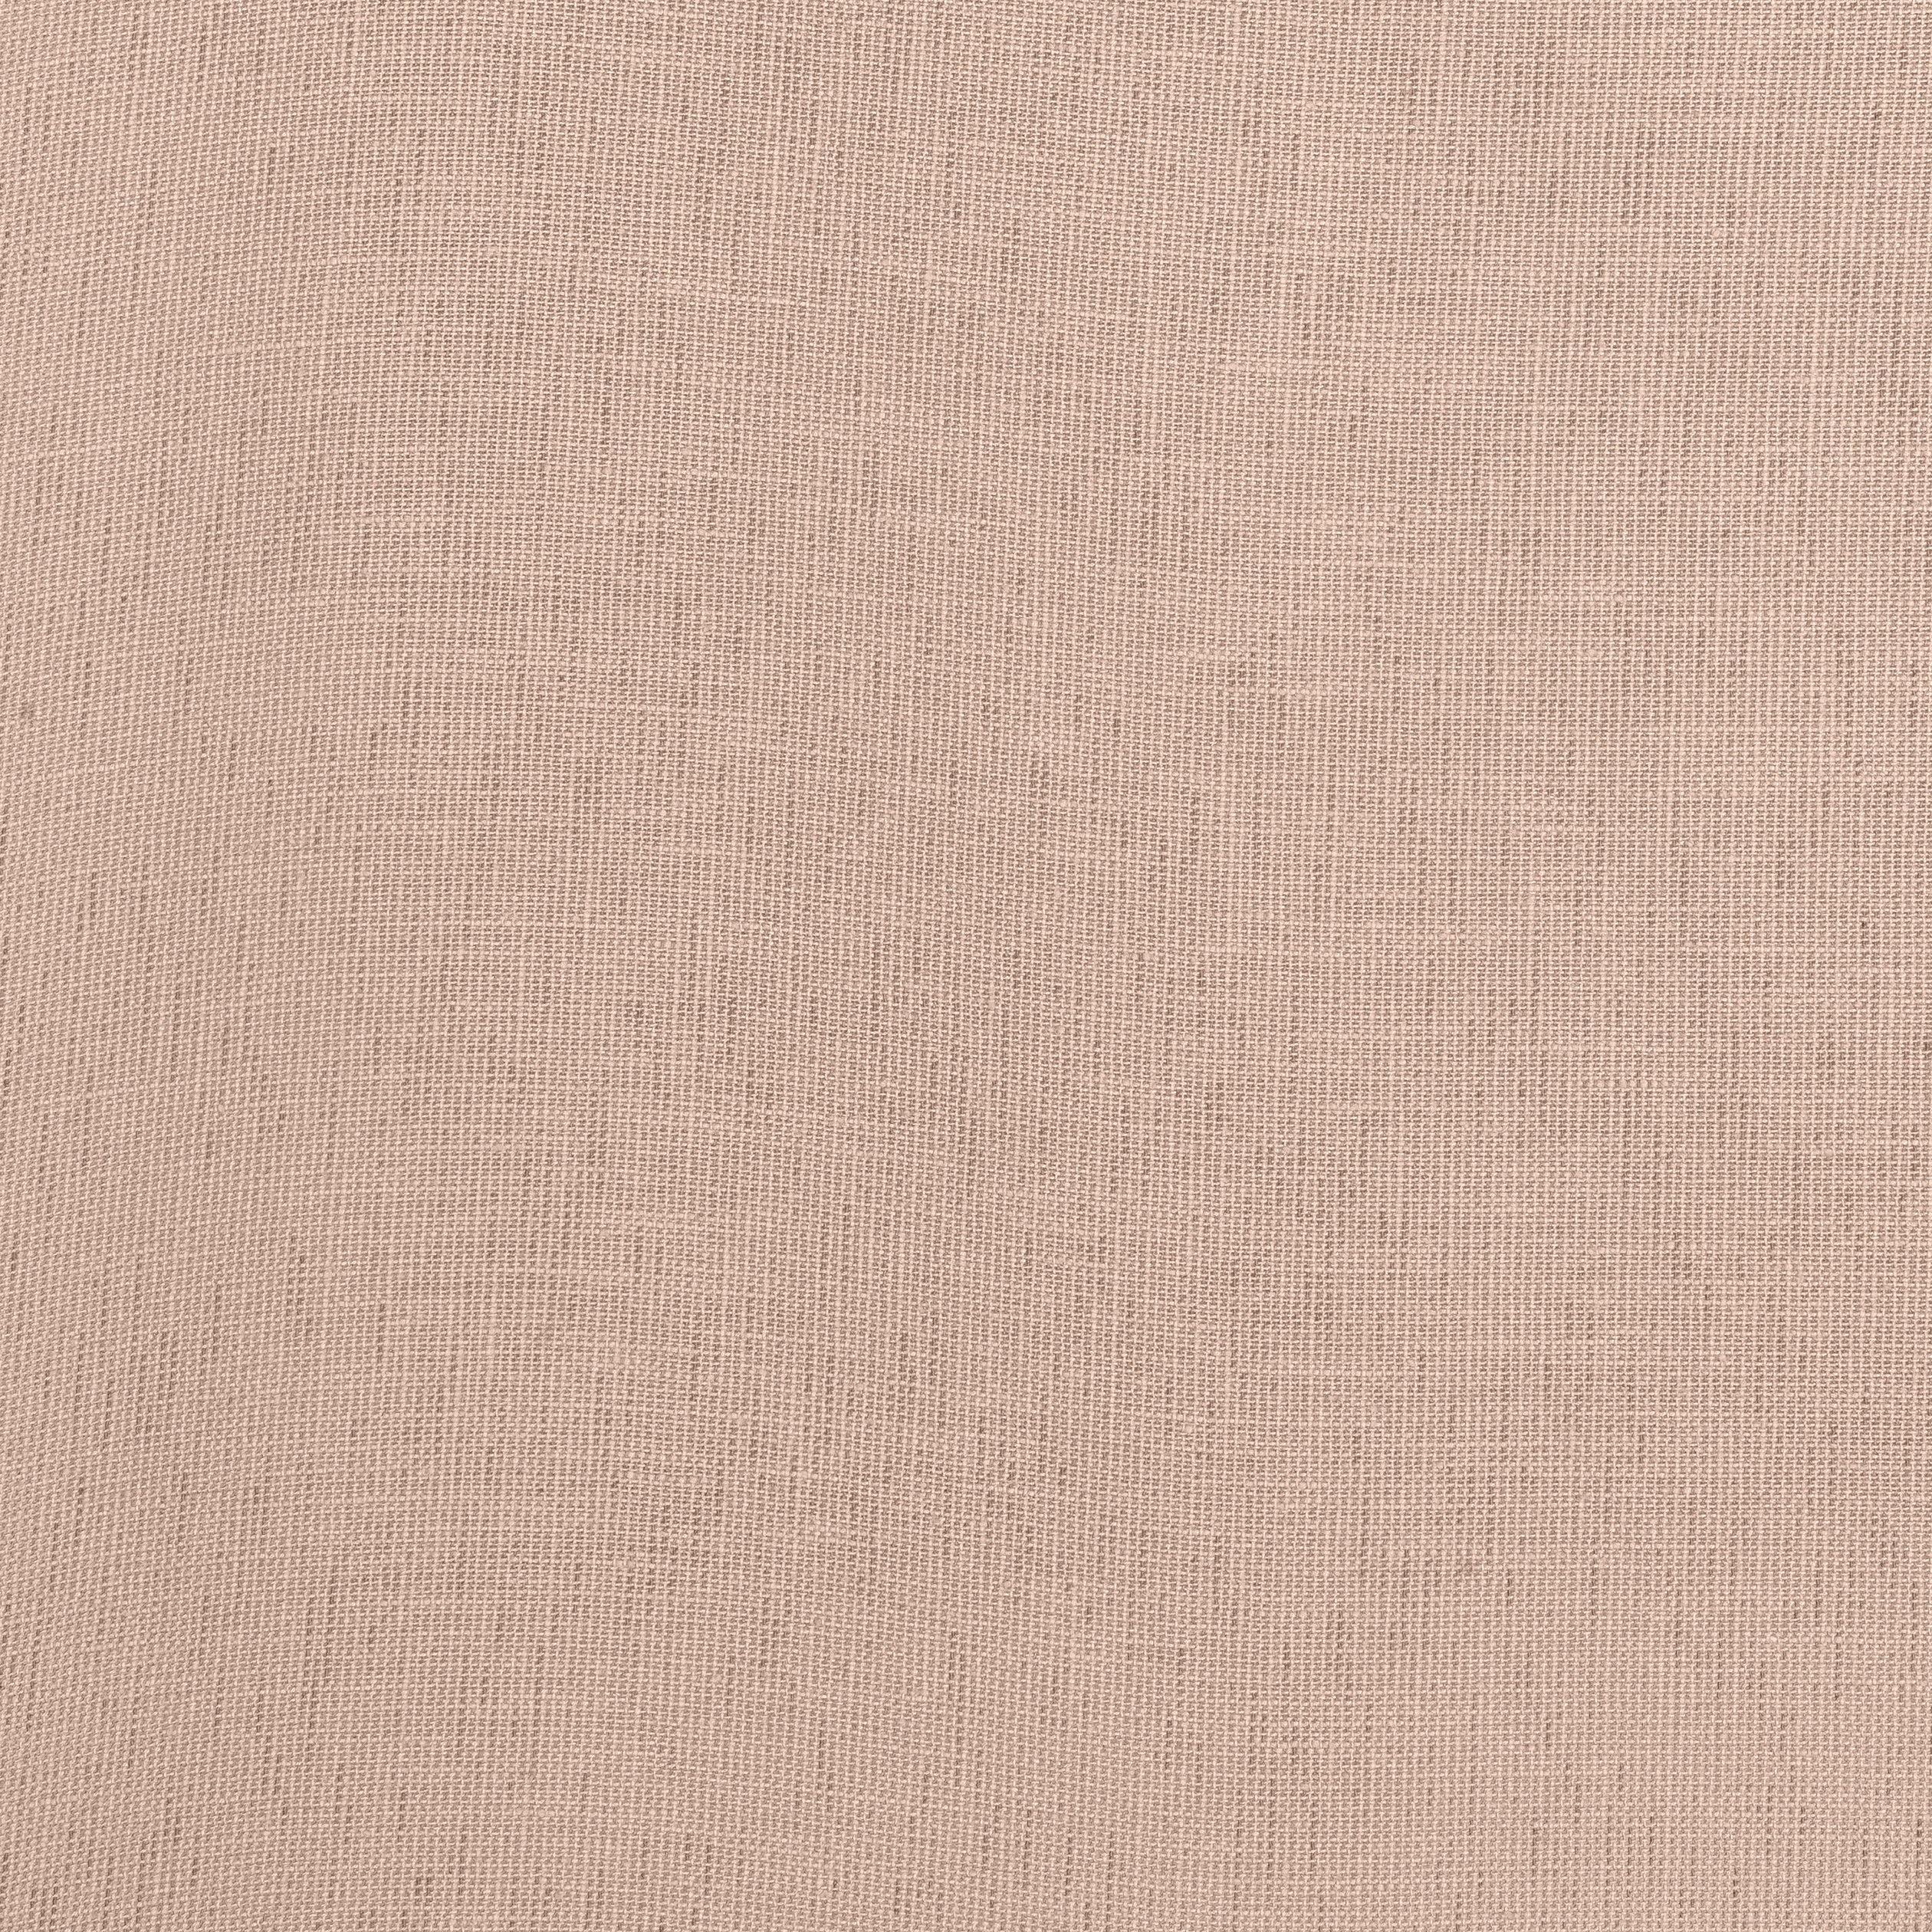 Ottawa fabric in clay color - pattern number FWW8252 - by Thibaut in the Aura collection